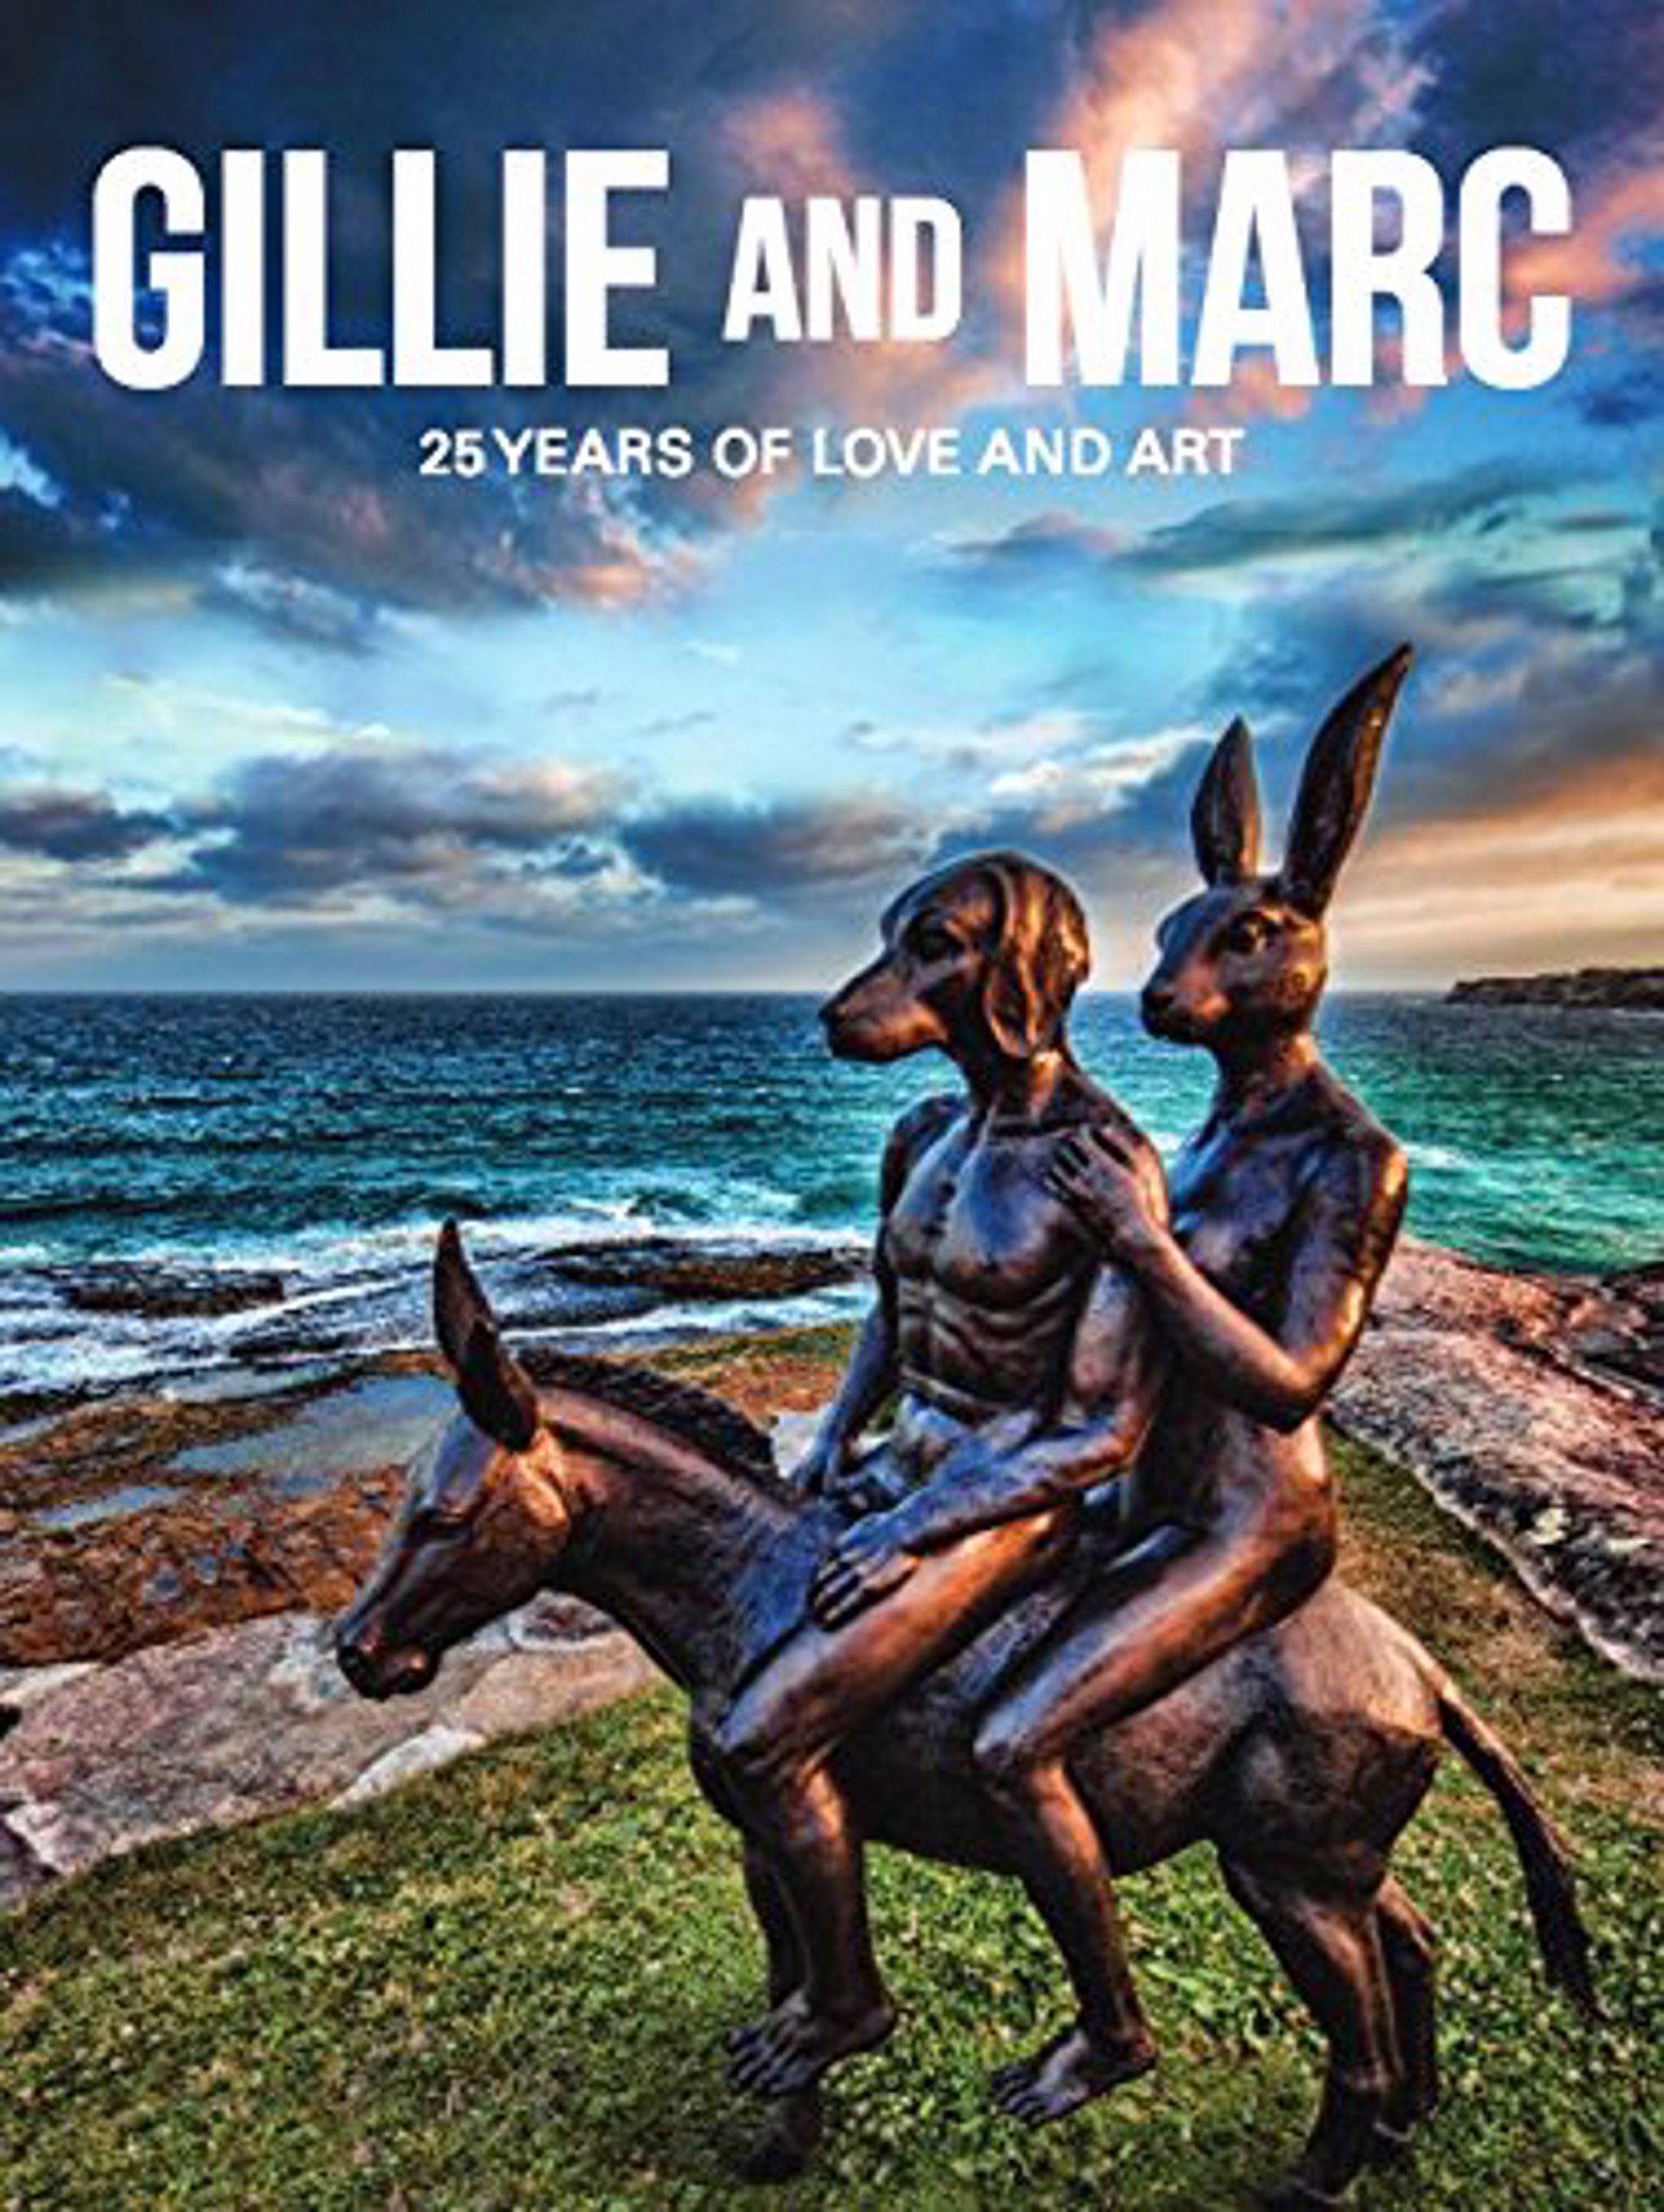 Gillie and Marc - 25 Years of Love and Art